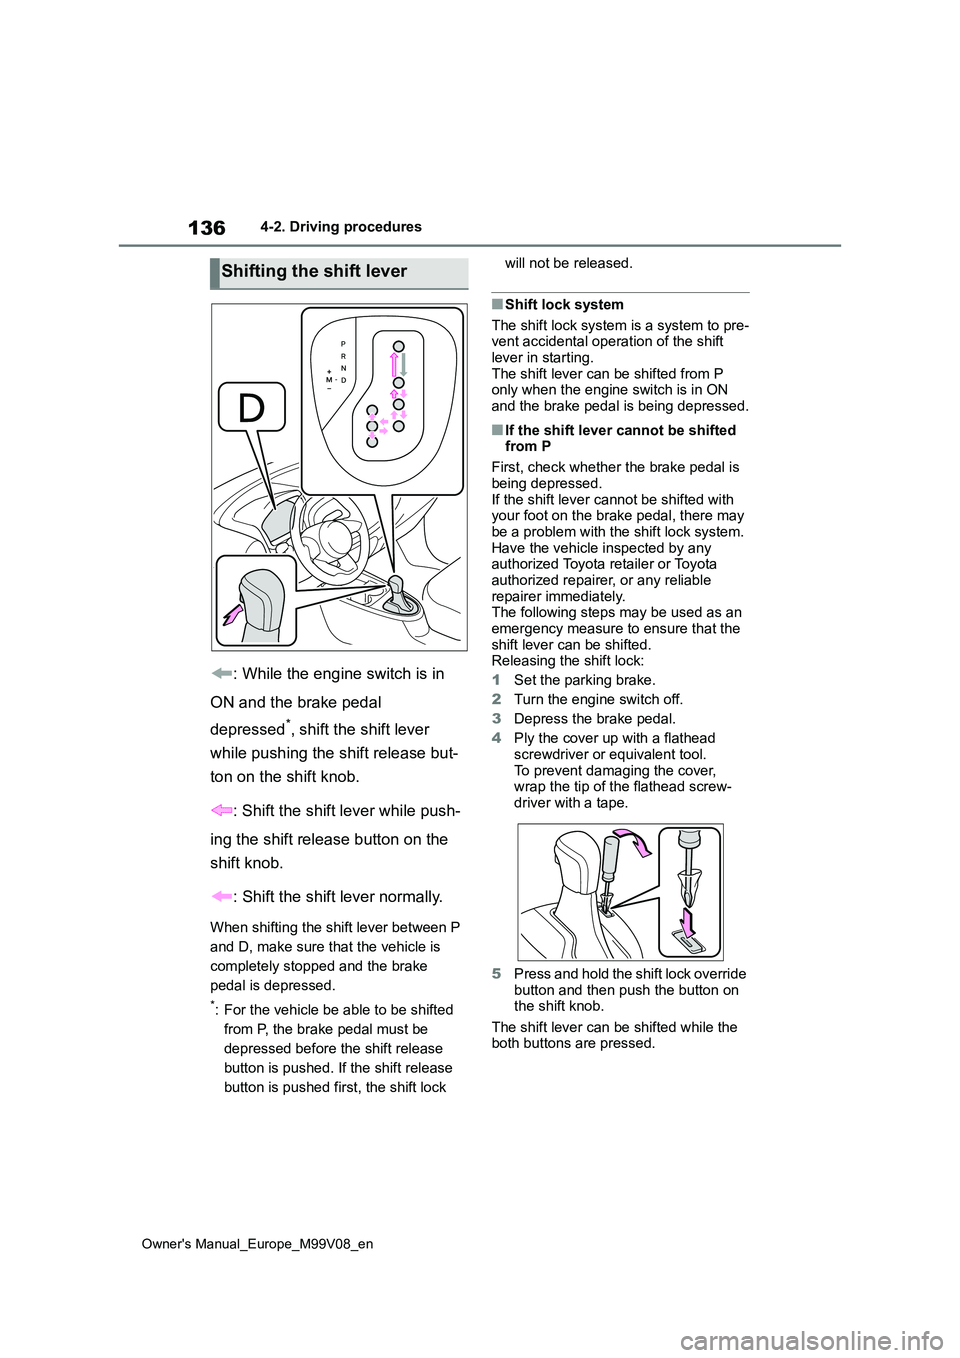 TOYOTA AYGO X 2022   (in English) Service Manual 136
Owner's Manual_Europe_M99V08_en
4-2. Driving procedures
: While the engine switch is in  
ON and the brake pedal  
depressed*, shift the shift lever  
while pushing the shift release but-
ton 